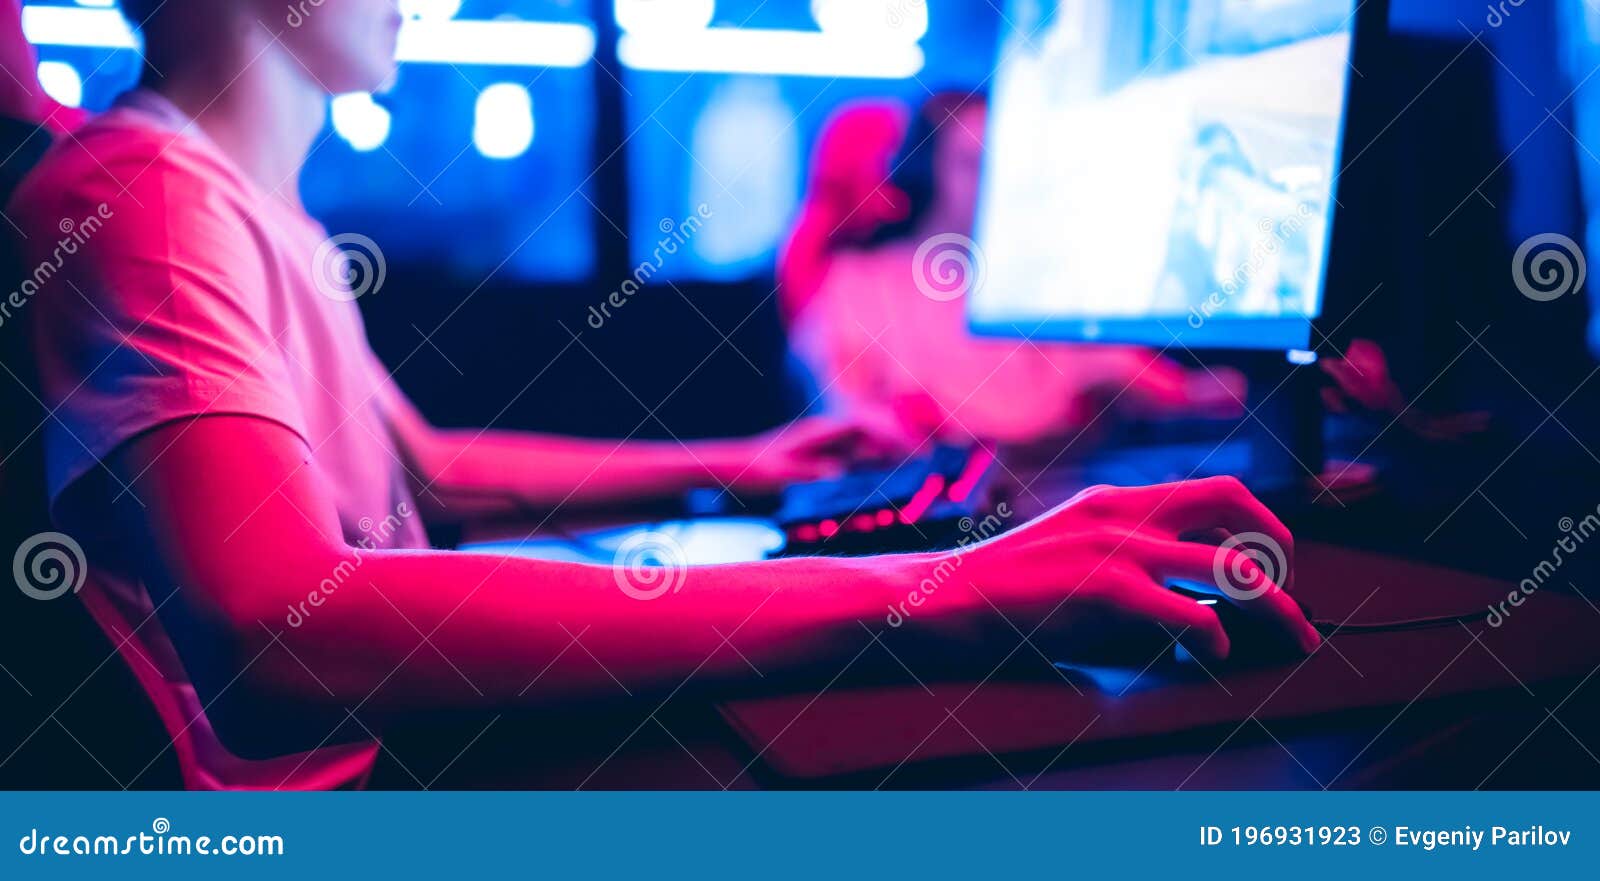 Professional Gamer Playing Online Games Tournaments Pc Computer with Headphones, Blurred Red and Blue Background Stock Image